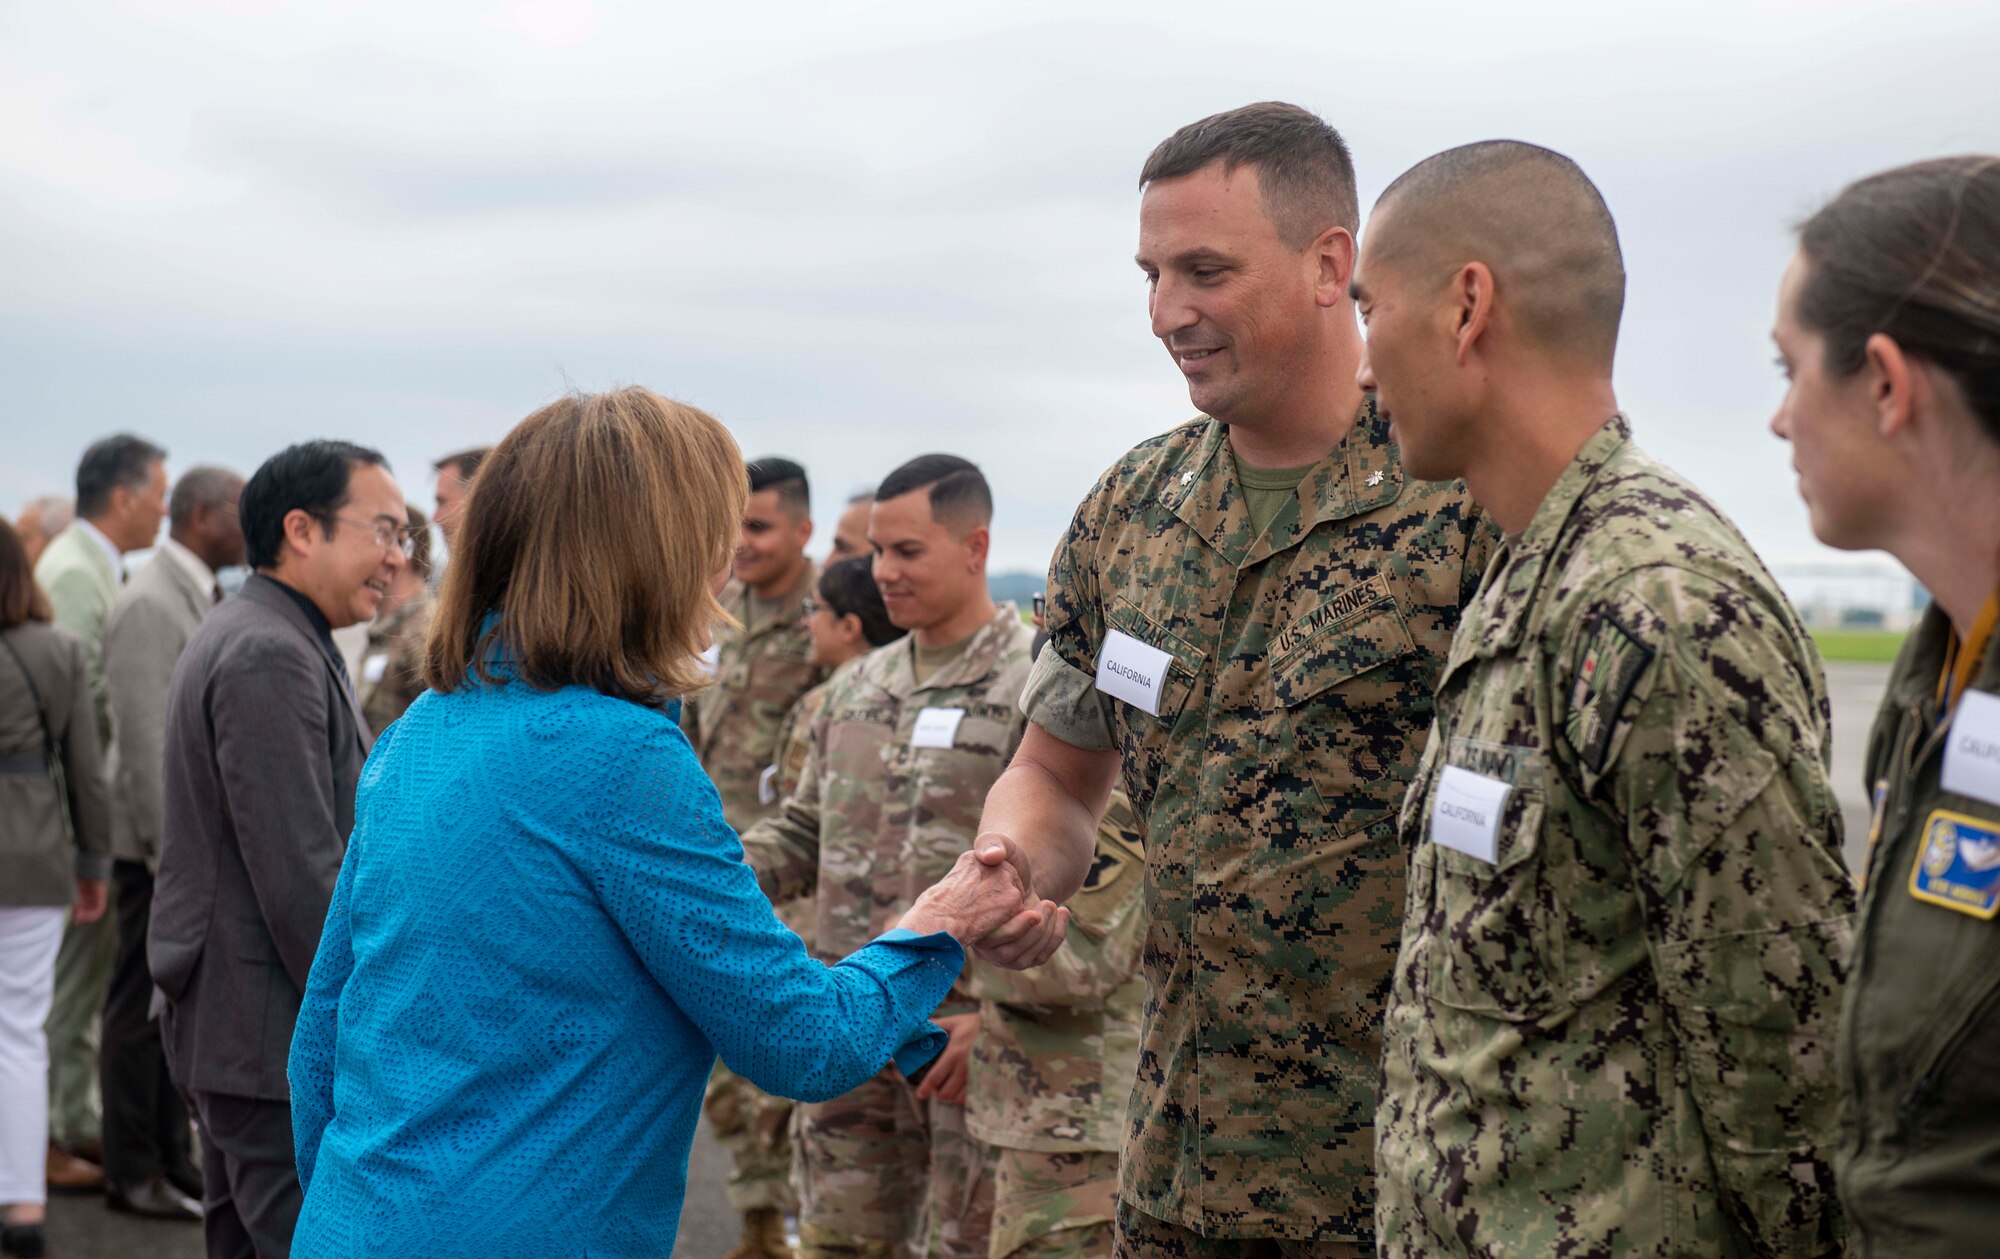 Speaker of the House Nancy Pelosi meets with service members